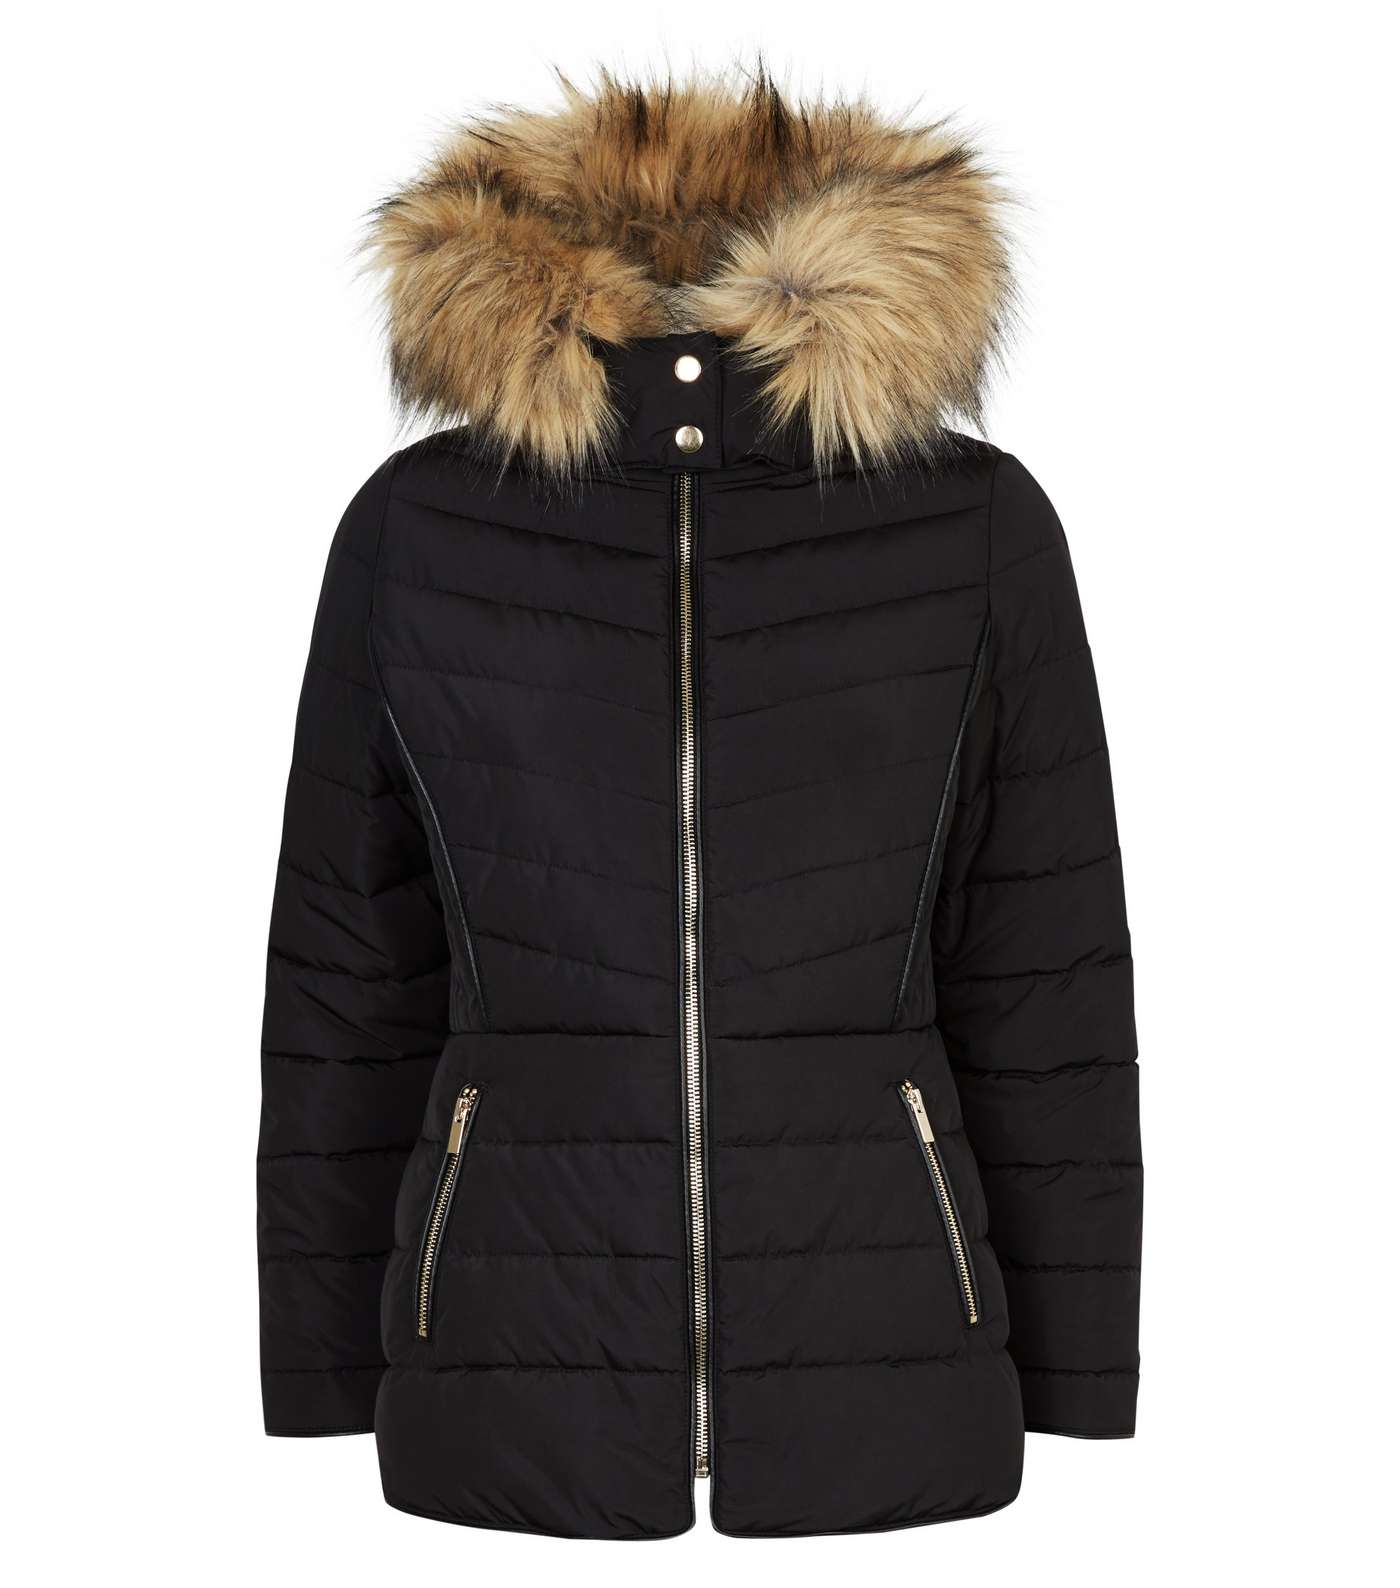 Petite Black Faux Fur Hood Fitted Puffer Jacket Image 4